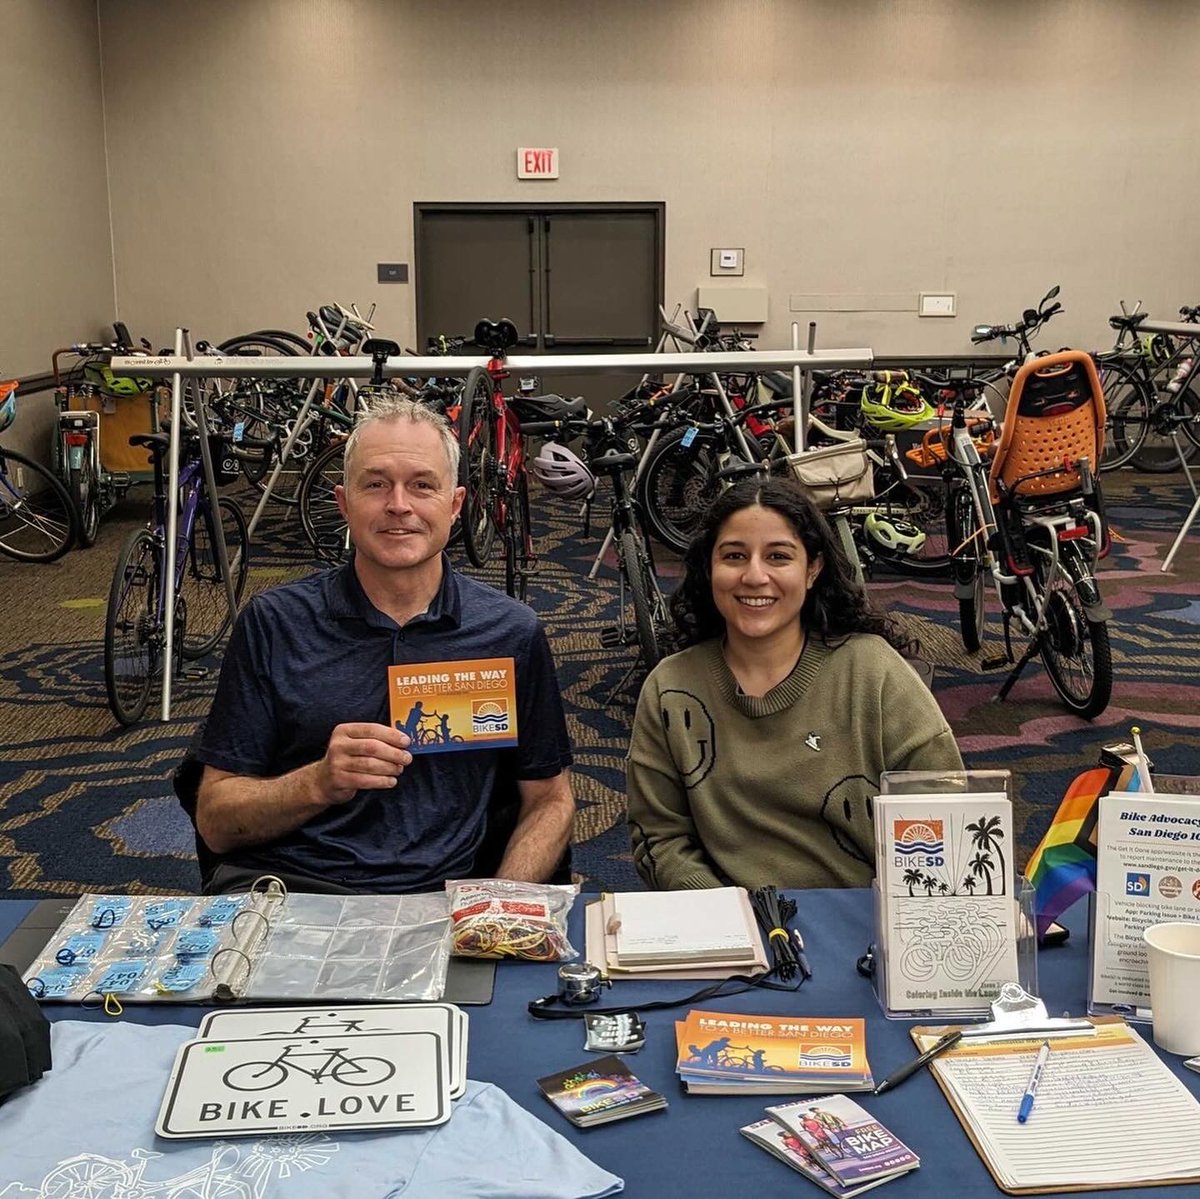 We had the awesome opportunity to help plan, speak at, and provide bike valet for the 2024 @CalBike Summit. Special shoutout to our volunteers that ensured a smooth bike valet operation - y’all made this event that much better 🚲 ❤️